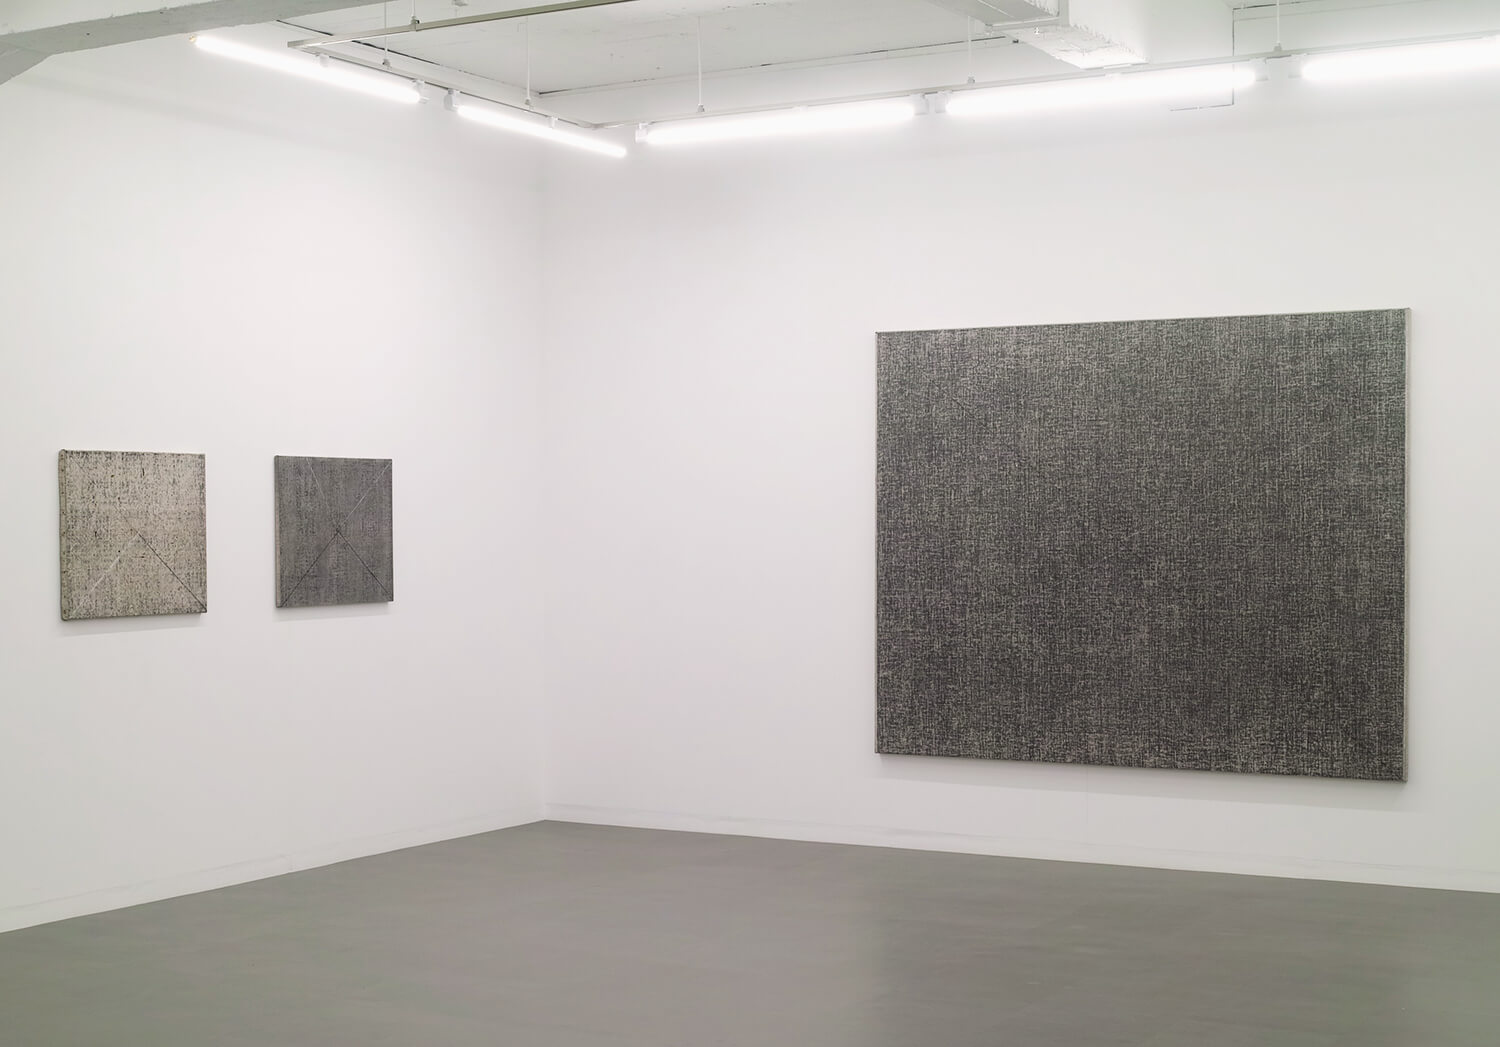 Drawing by drawing, Oil, crayon, chalk on canvas, 60.5 x 72.5 cm, 1978 (left)<br>Drawing by drawing, Oil, crayon, chalk on canvas, 60.5 x 72.5 cm, 1978 (center)<br>Drawing by drawing, Oil, crayon, chalk on canvas, 182 x 227 cm, 1979 (right)